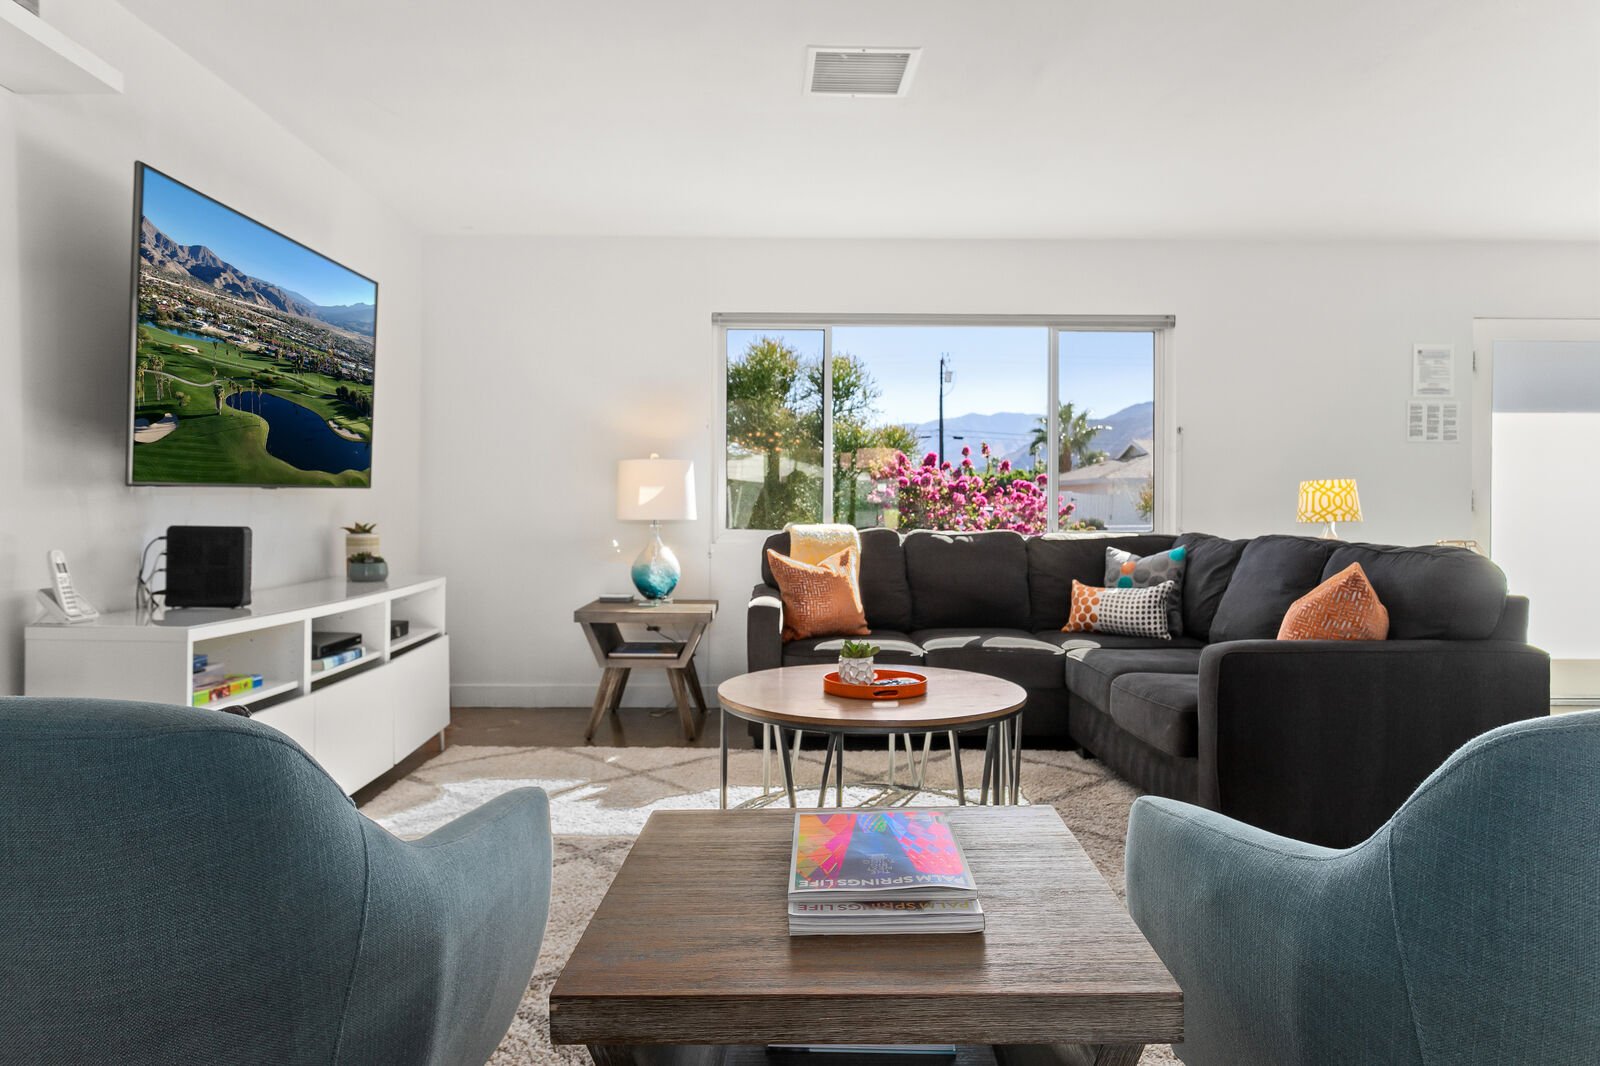 View our July 4th rentals in Palm Springs